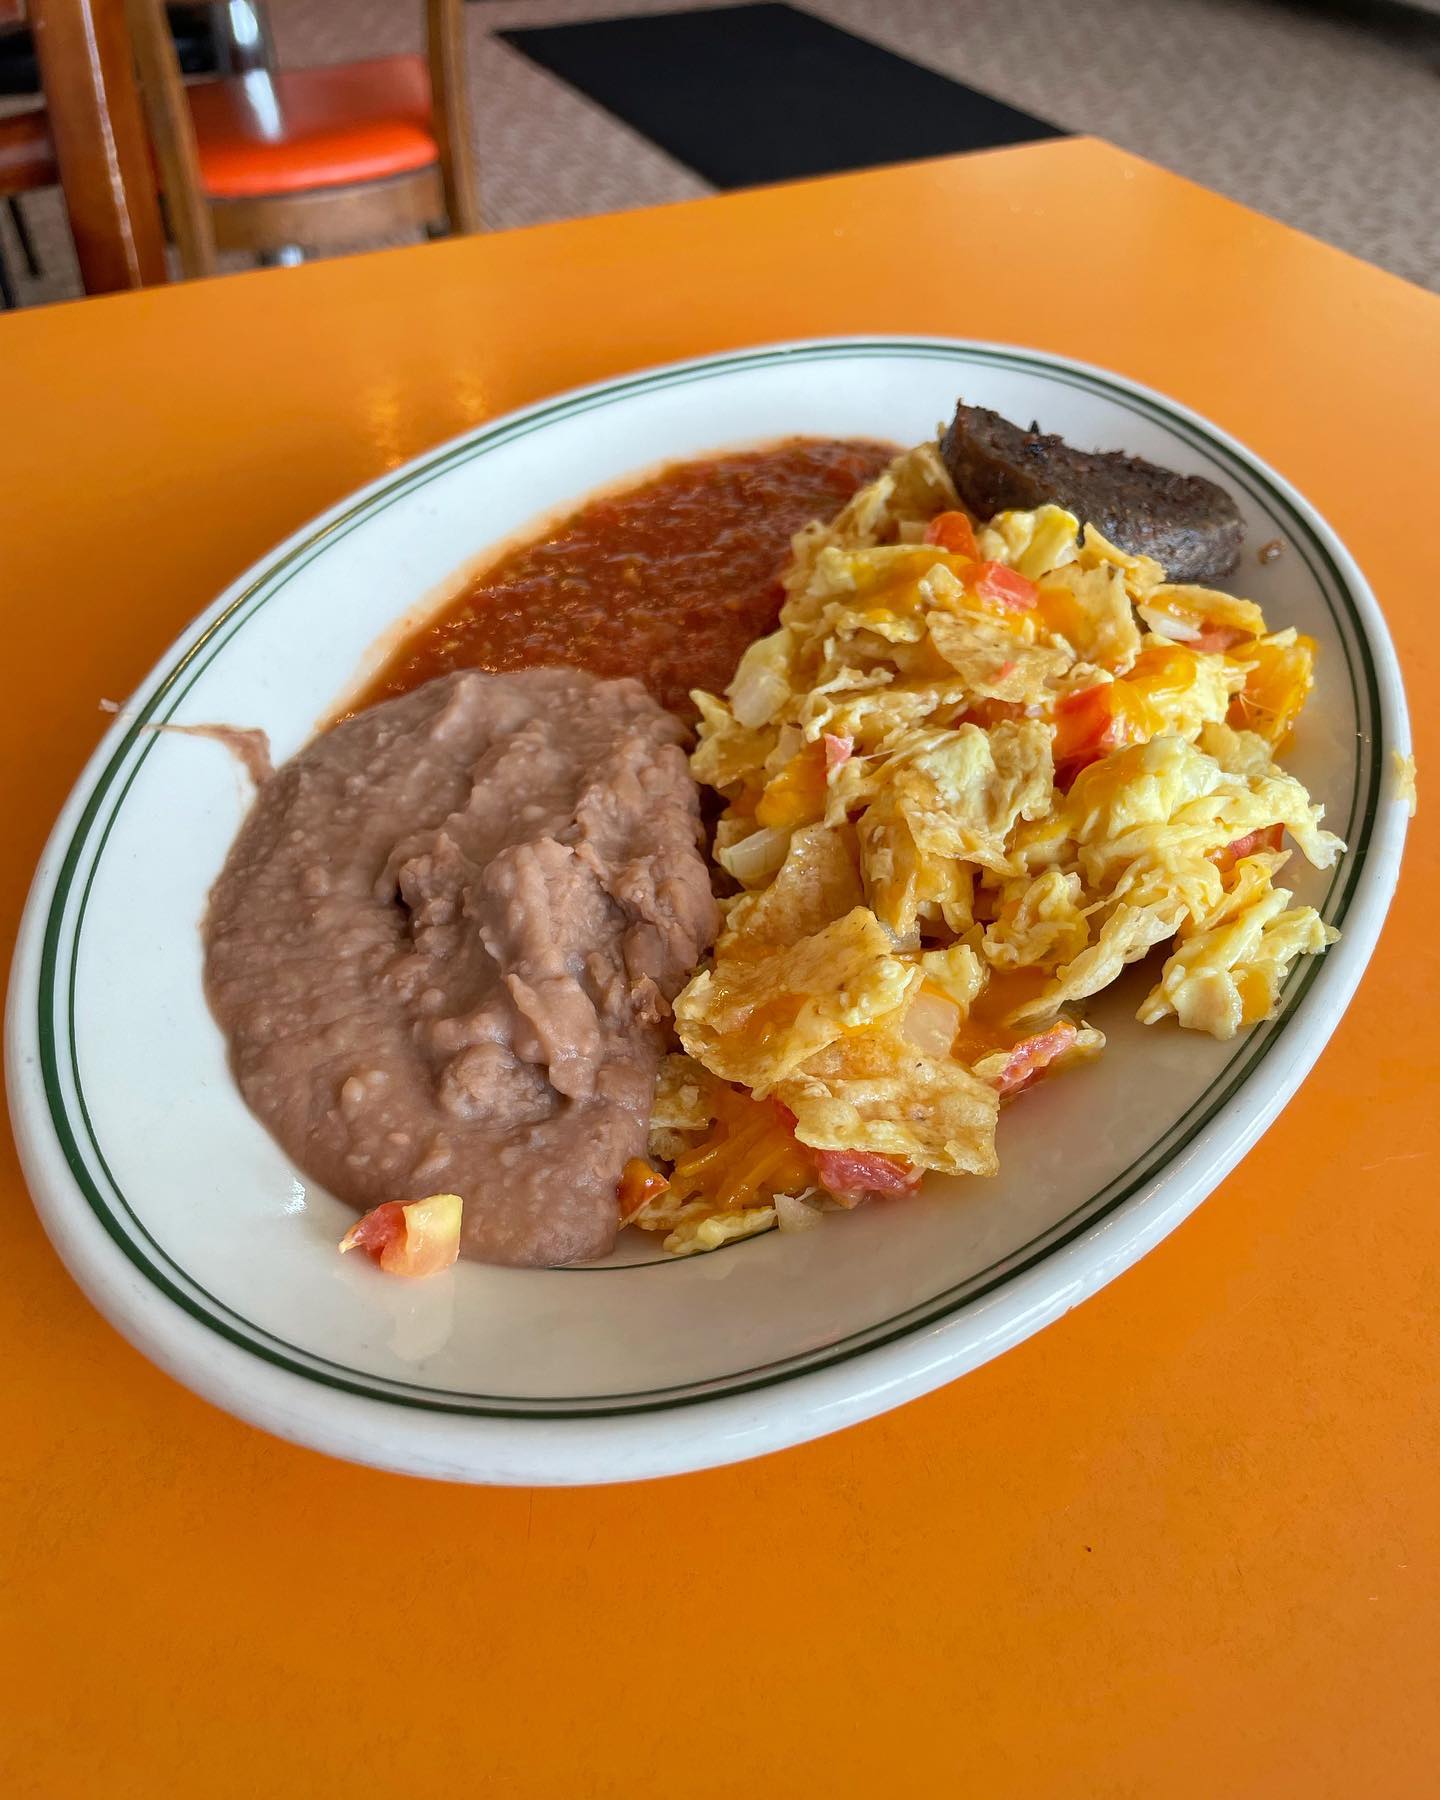 A plate of eggs with chips, refried beans, and red sauce.